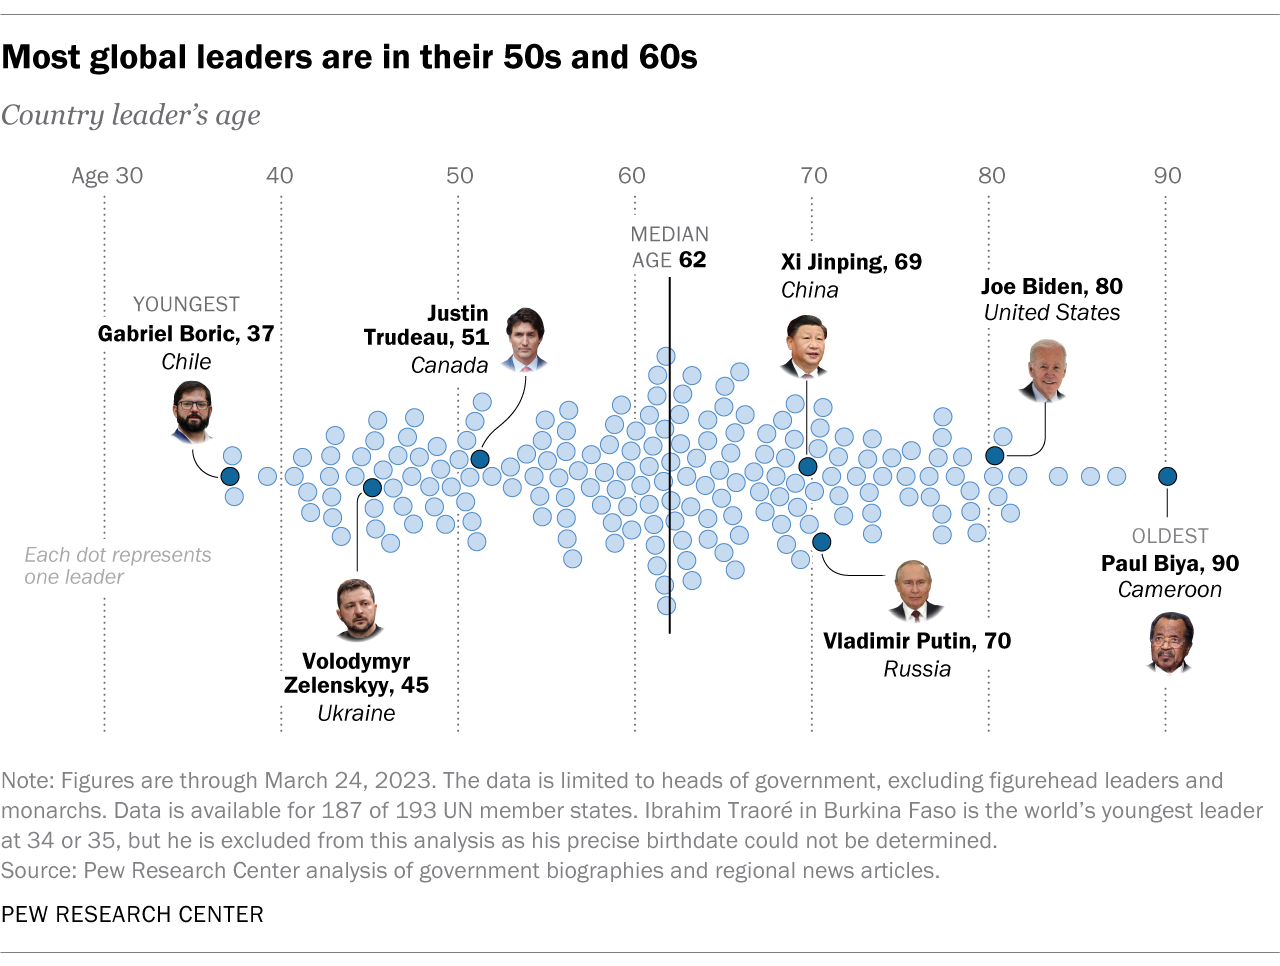 A chart showing that most global leaders are in their 50s and 60s, though ages range from 37 to 90